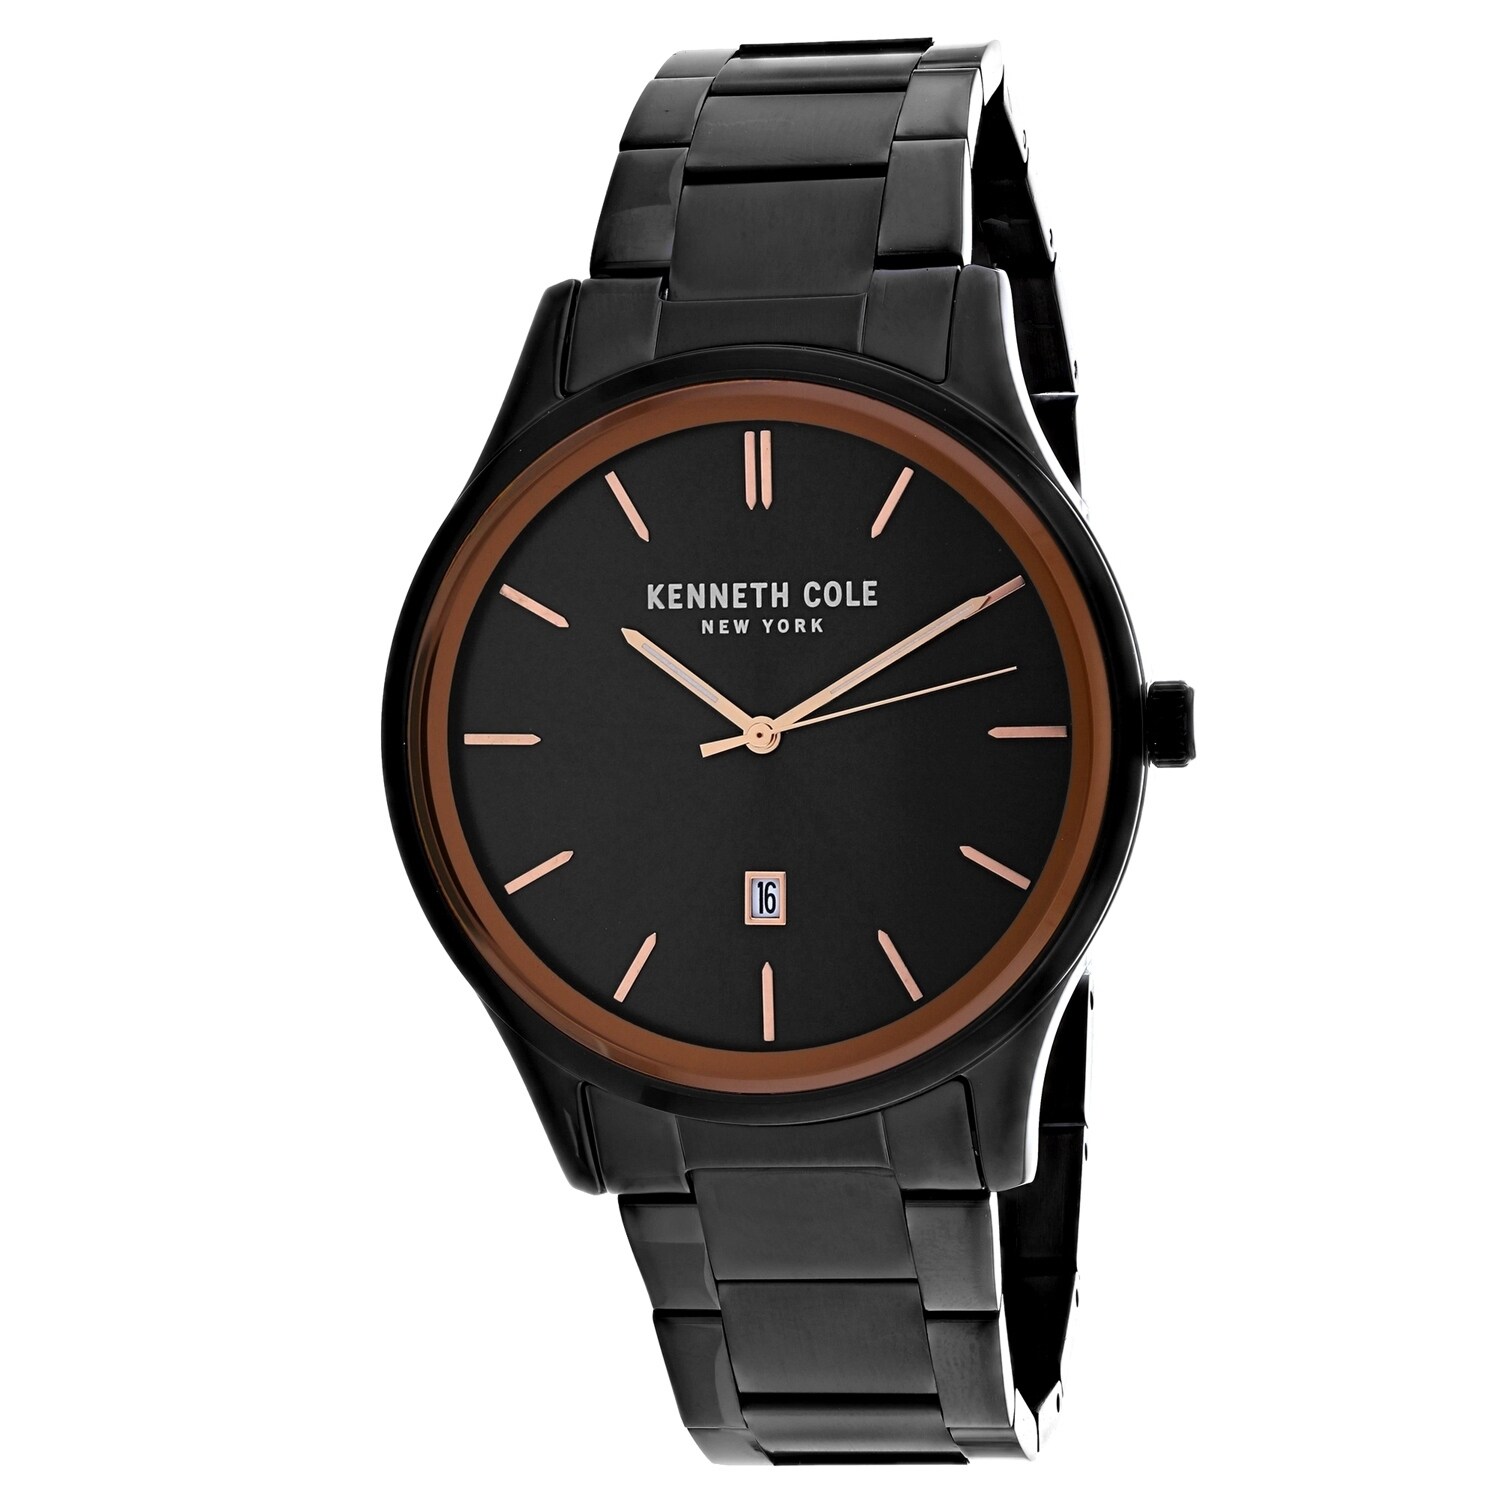 Kenneth Cole Men's 3-Hand - image 2 of 2